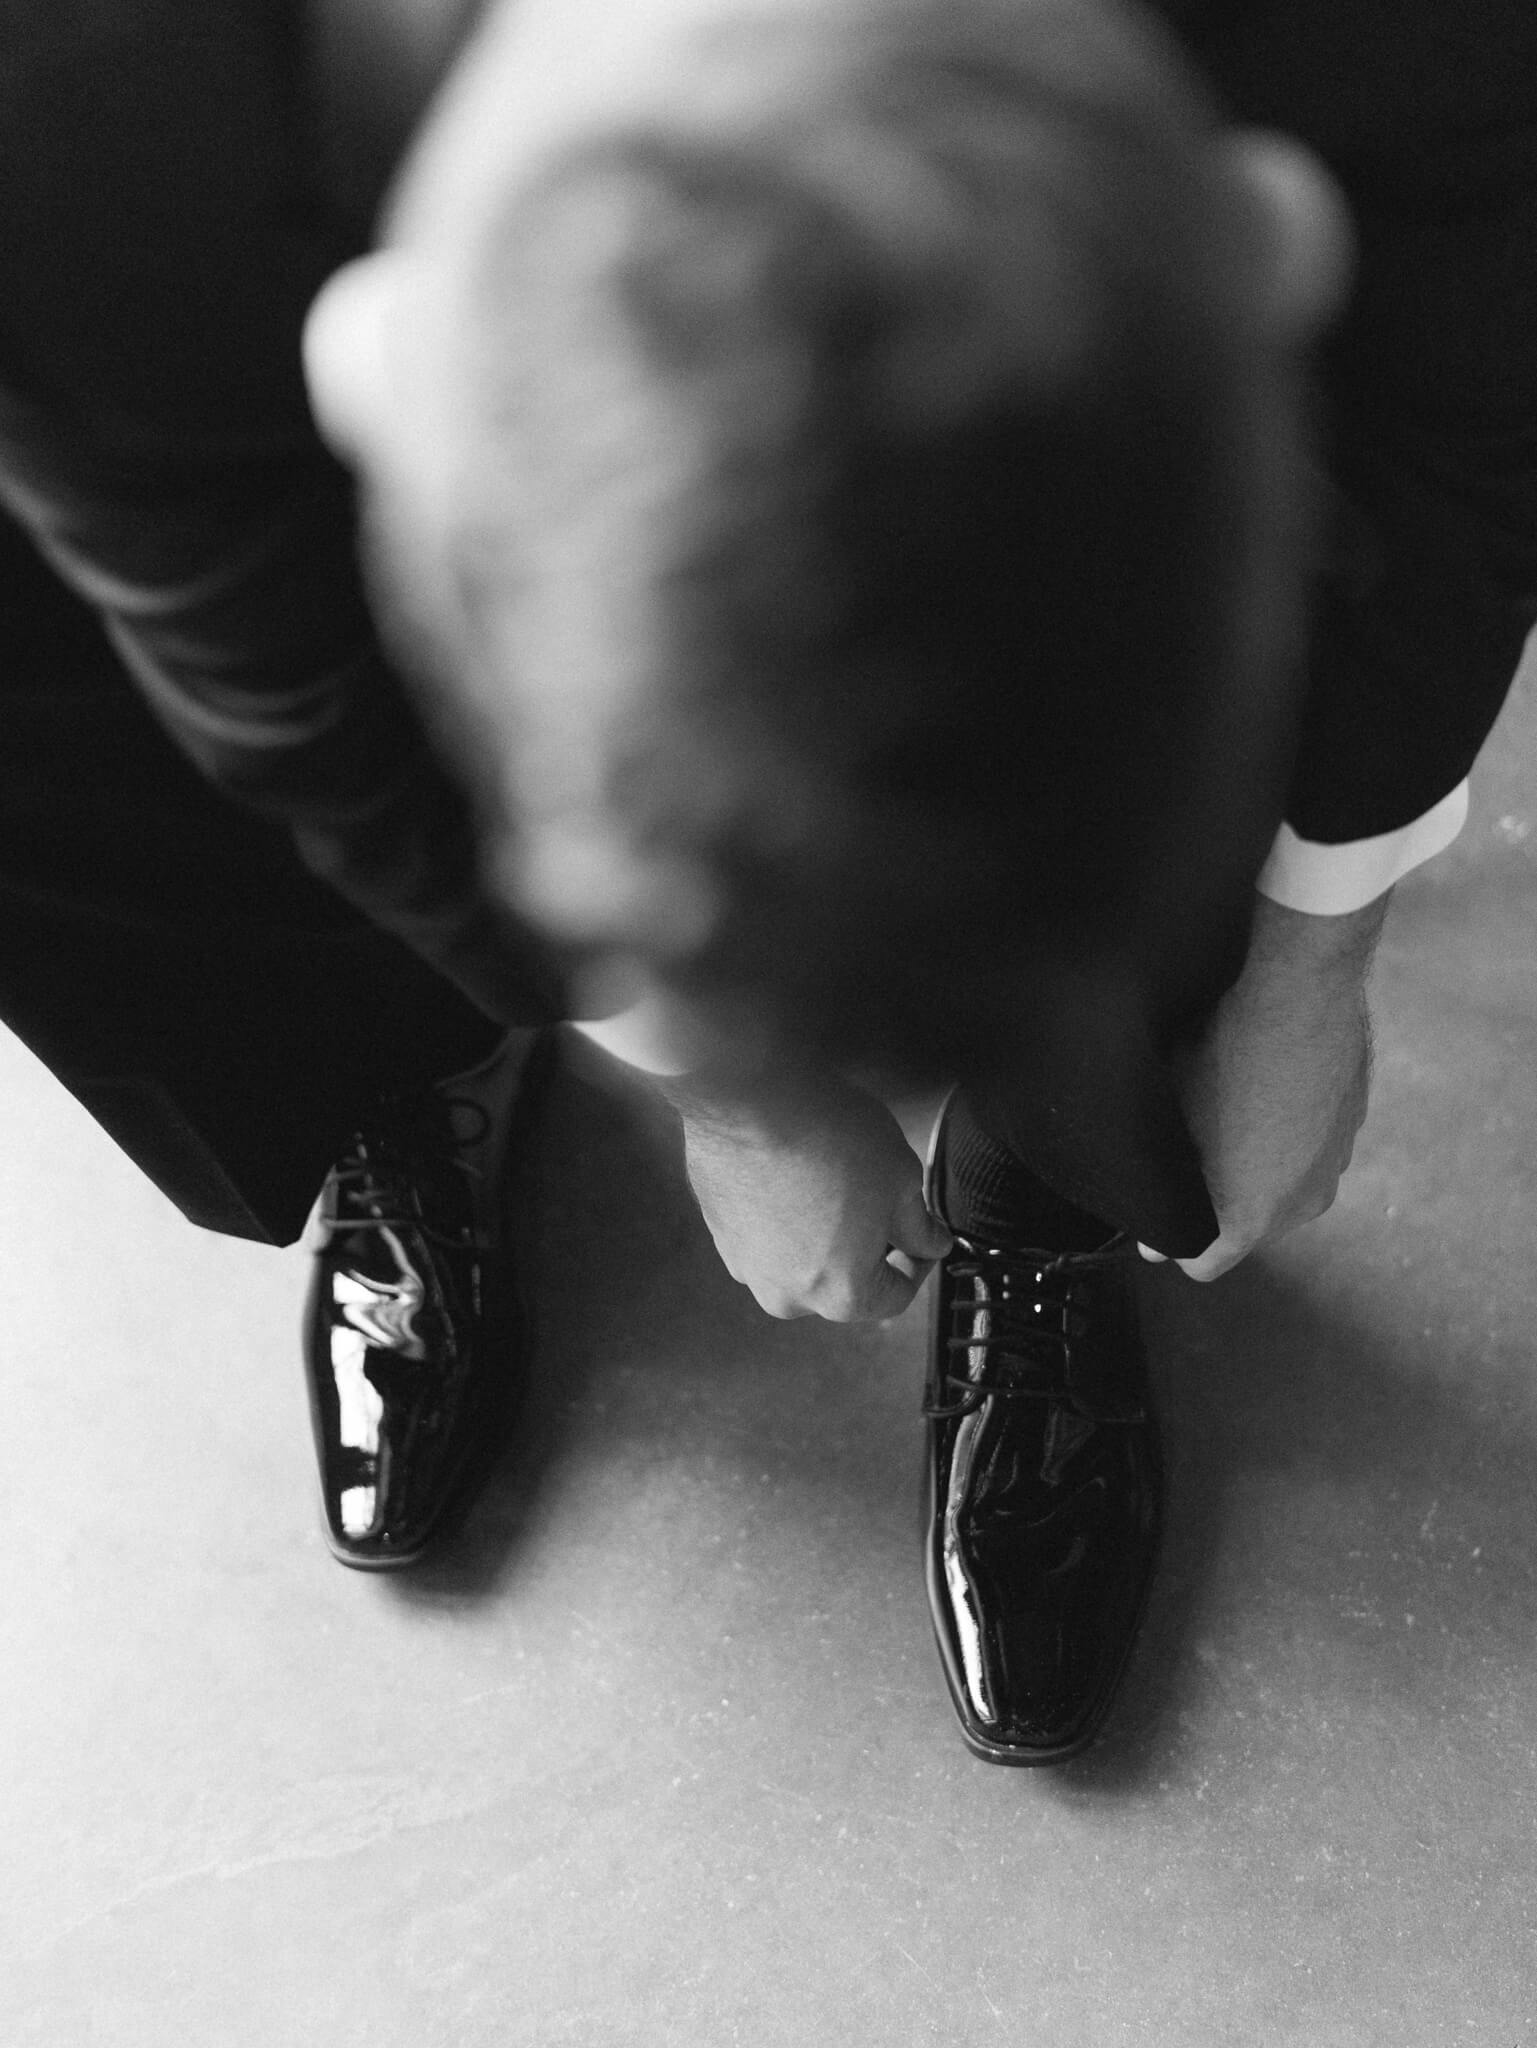 Black and white image from above of a groom in a tux tying his shoe.